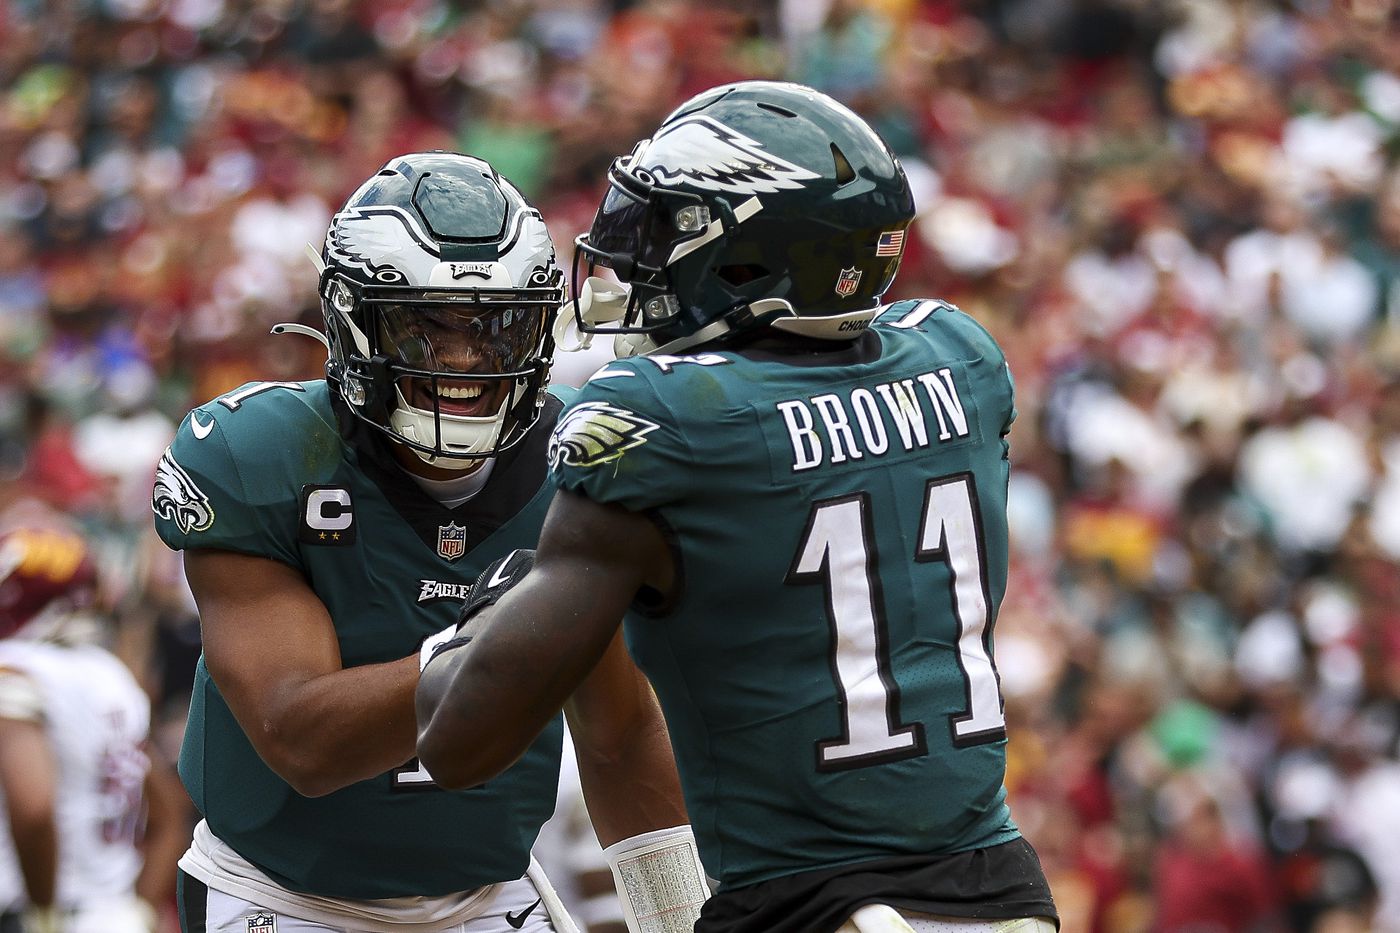 “Listen, I love Philly. (But) if you do not pay this man, just ship me off wherever he fitting to go,” Brown said. “You talk about pressure? Howie, get it done.”